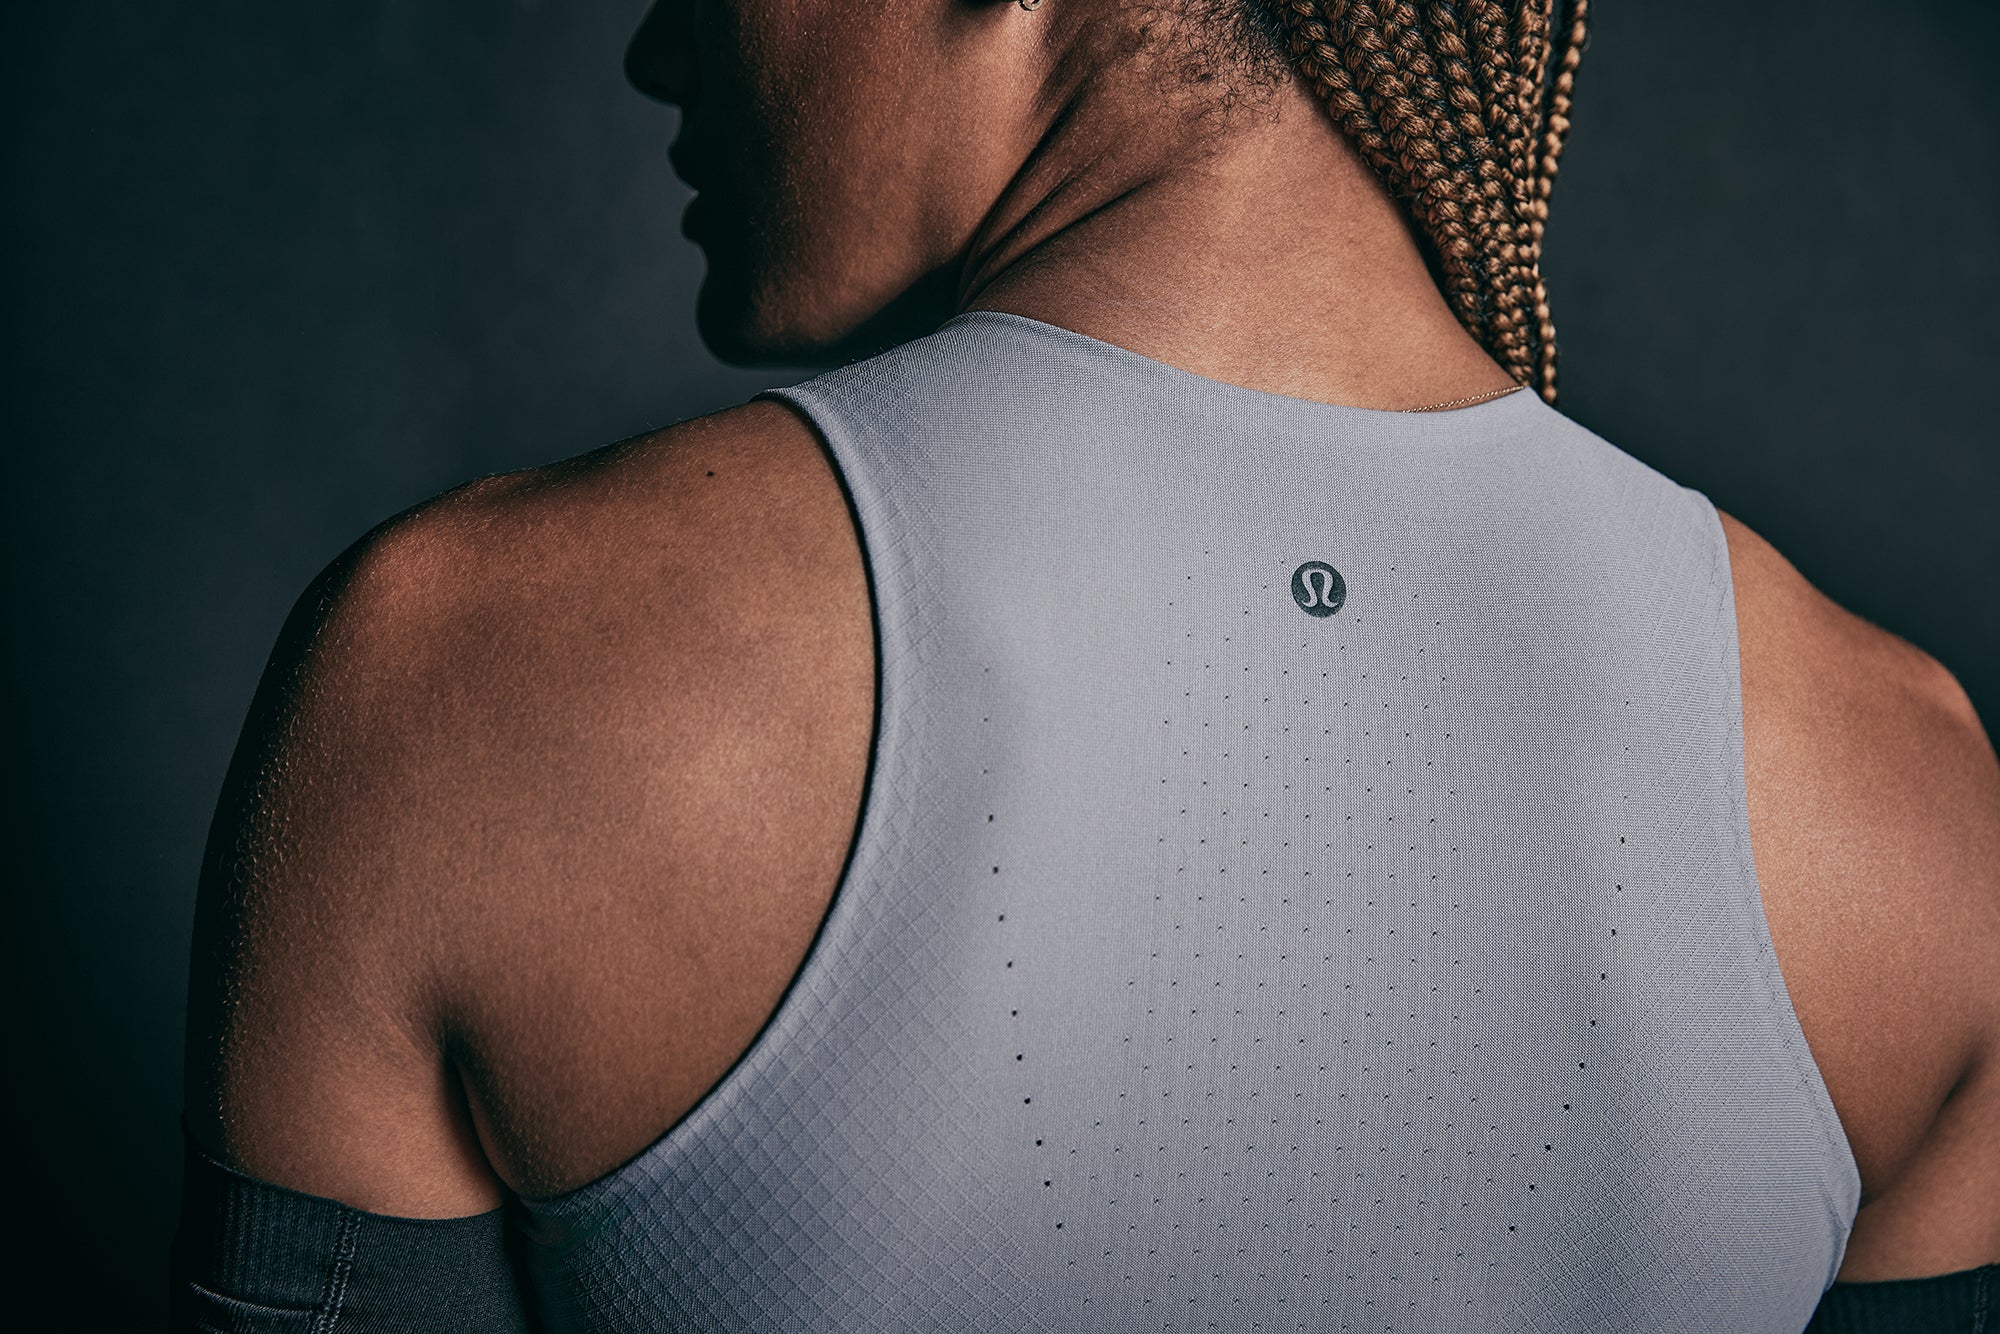 lululemon Launches SenseKnit™ Running Collection That Goes The